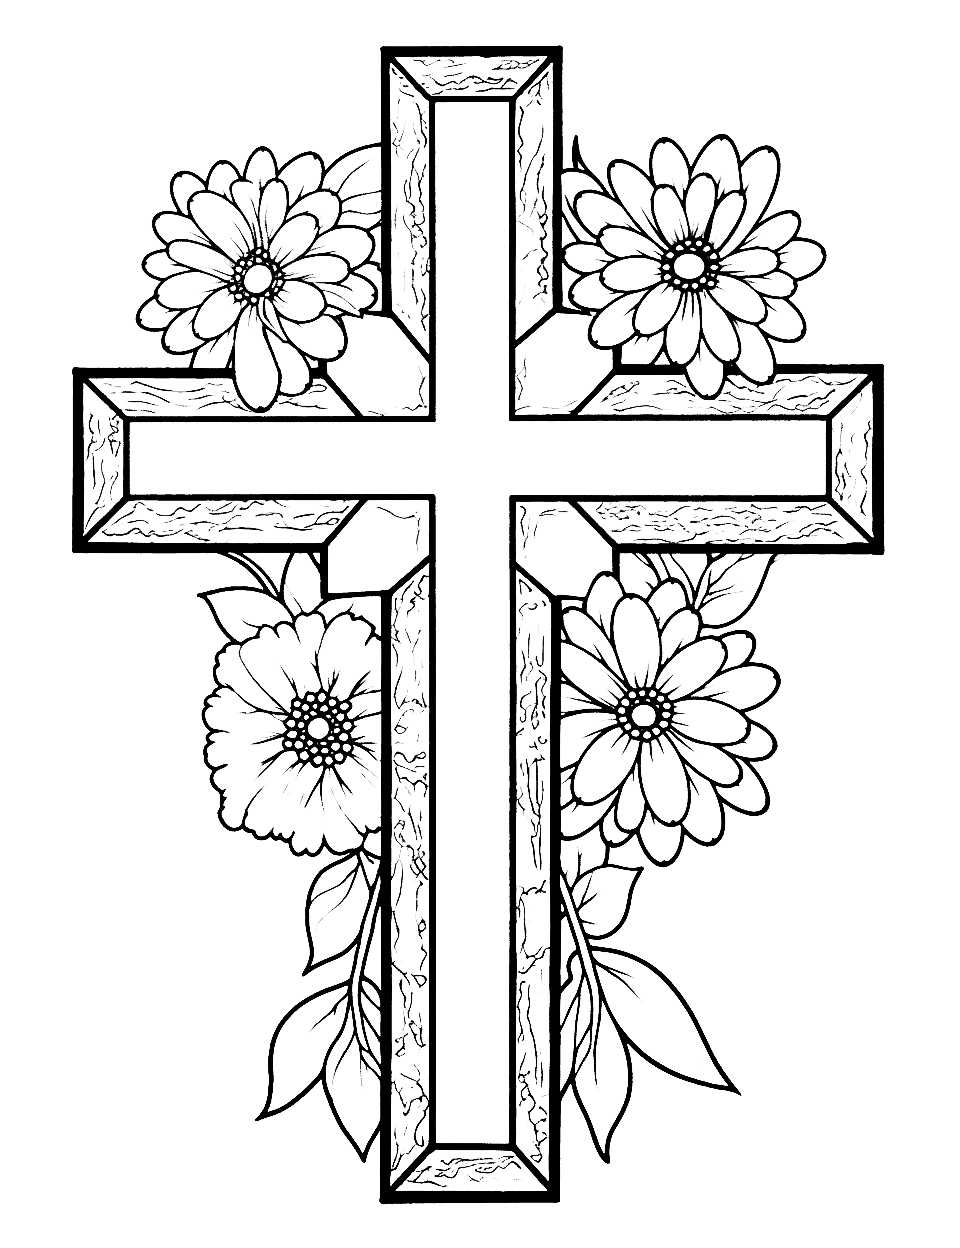 Cross and Flowers Easter Coloring Page - A beautiful cross adorned with blooming flowers representing the significance of Easter.